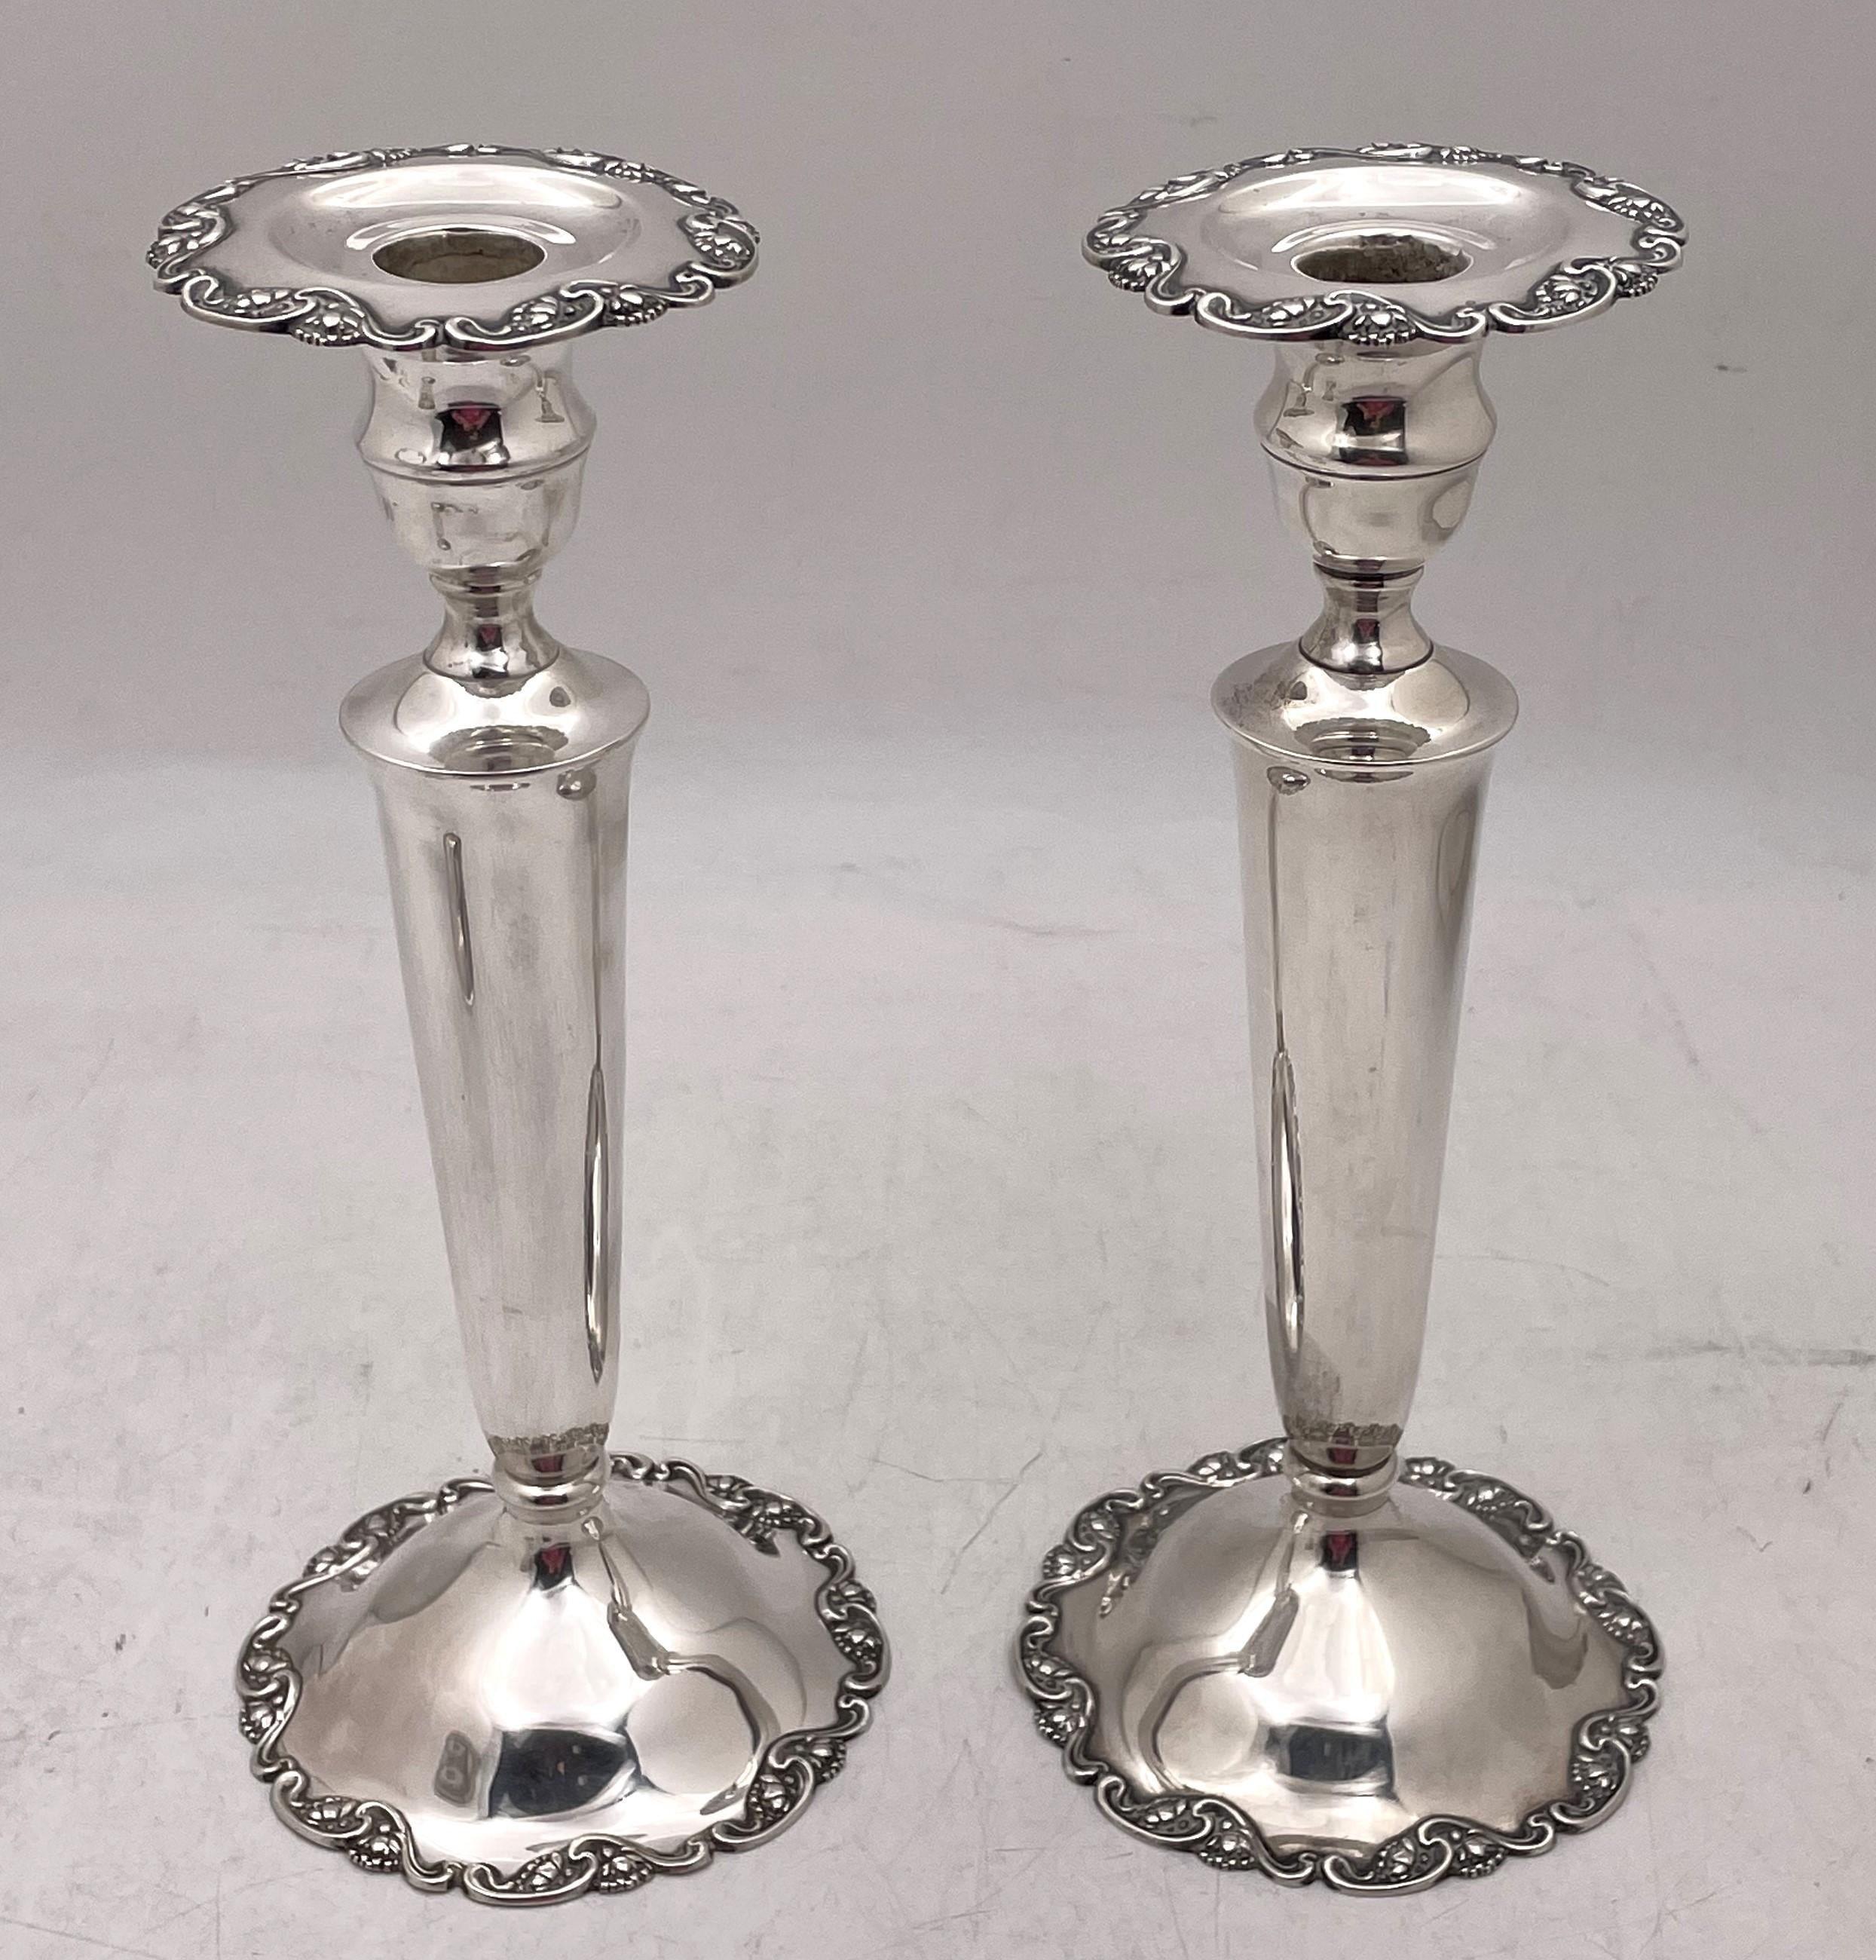 Mueck Carey pair of sterling silver candlesticks with stylized floral and geometric motifs and with removable bobeches. They measure 10 1/4'' in height by 4 1/3'' in diameter at the base, are weighted, and bear hallmarks as shown. Perfect for